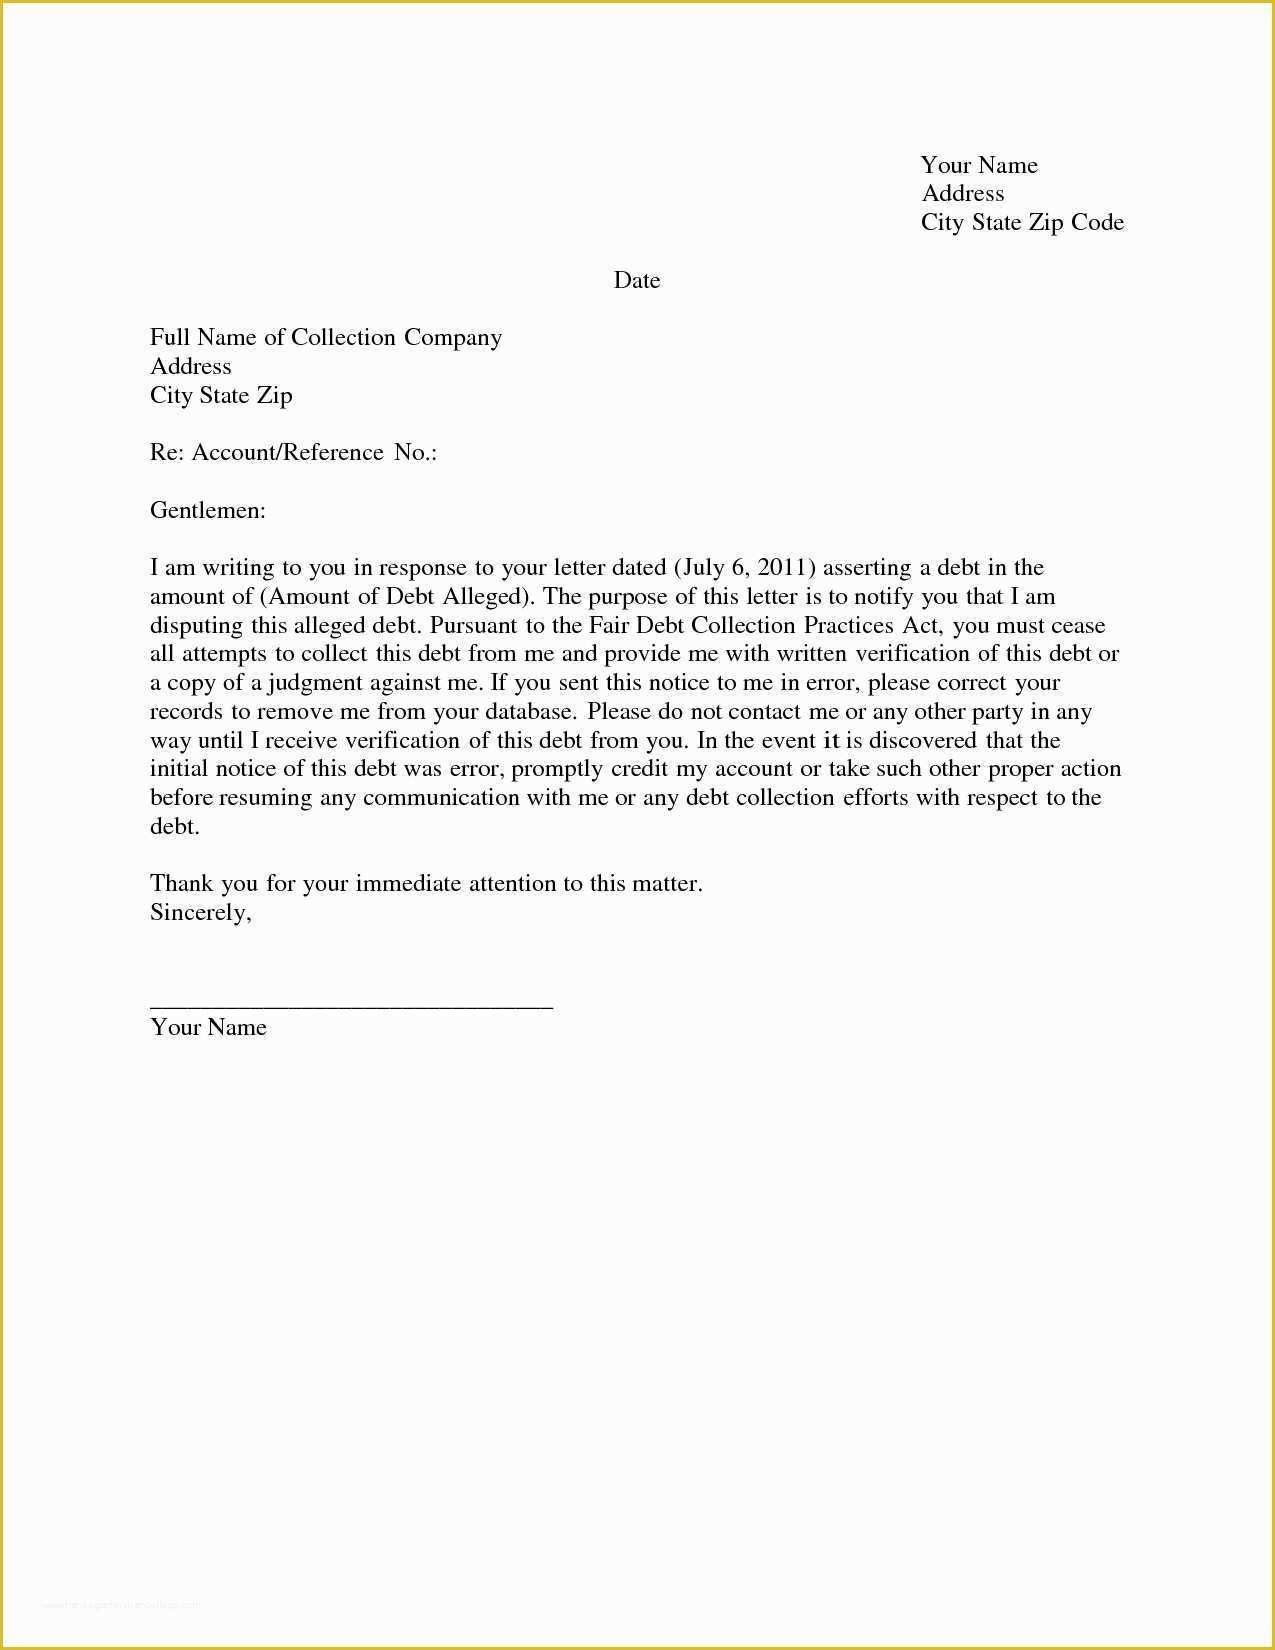 609 Letter Template Free Of 609 Dispute Letter to Credit Bureau Template Gallery